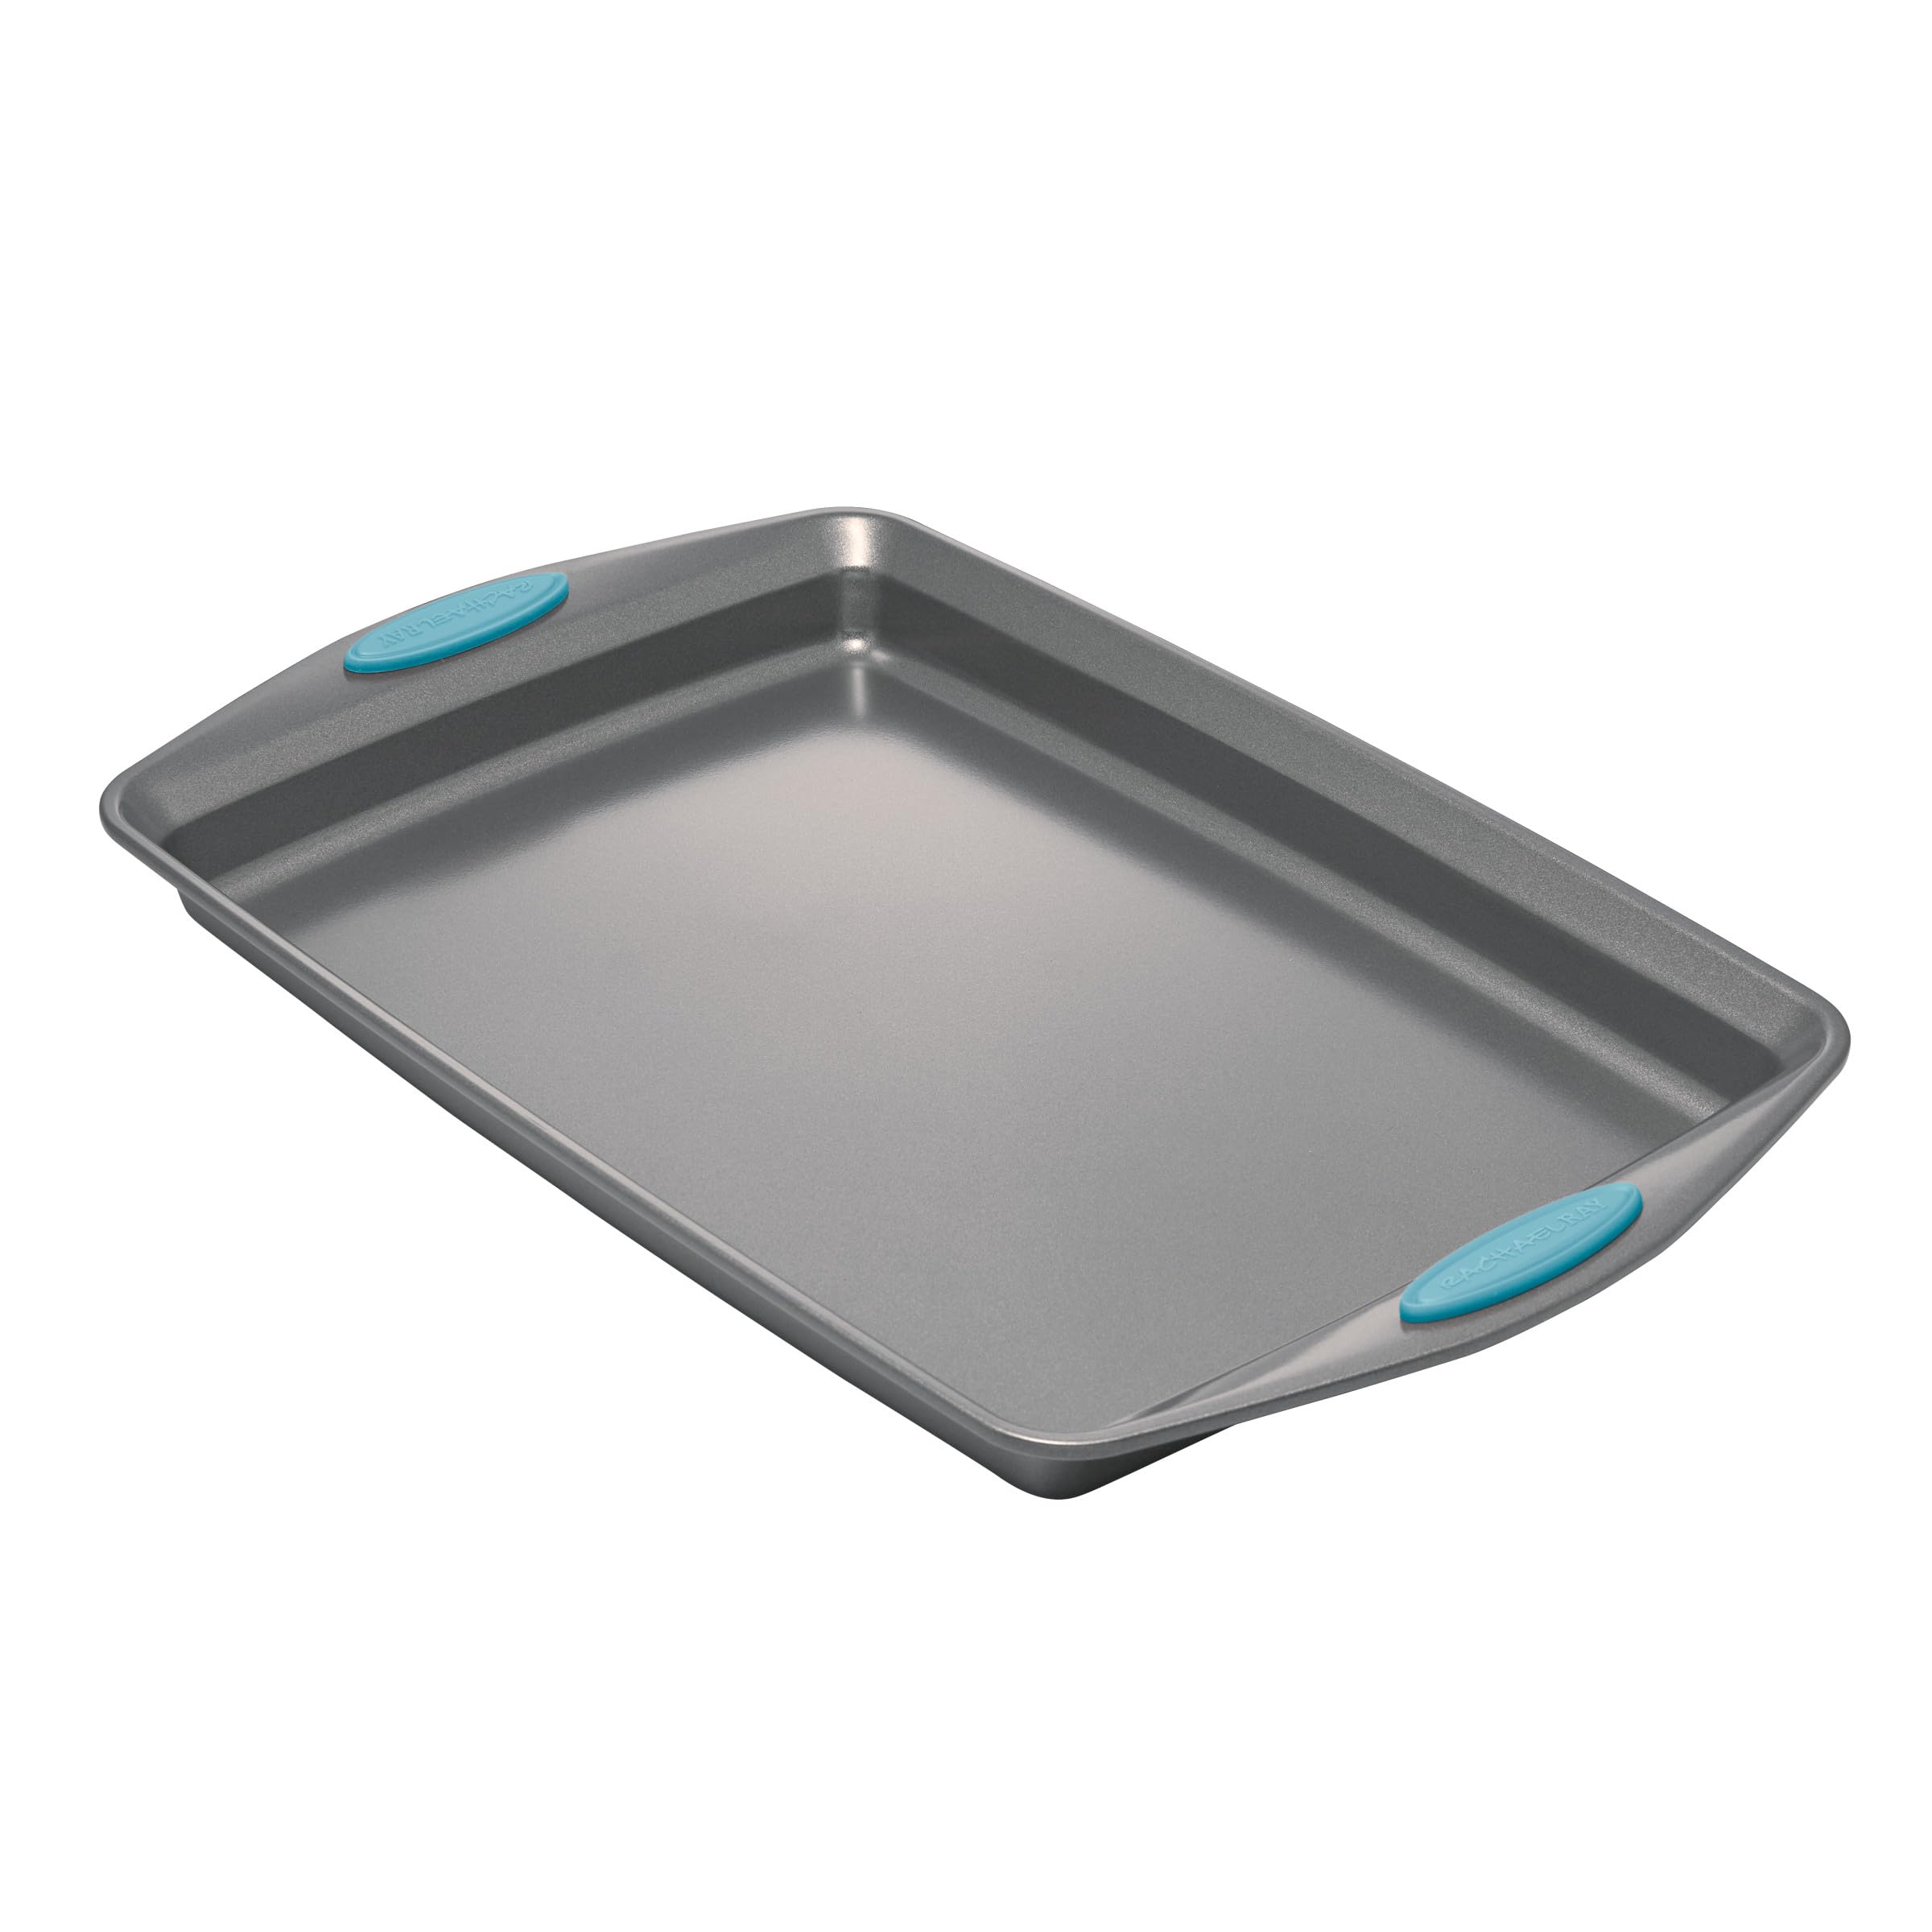 Rachael Ray Bakeware Nonstick Cookie Pan Set, 3-Piece, Gray with Agave Blue Grips